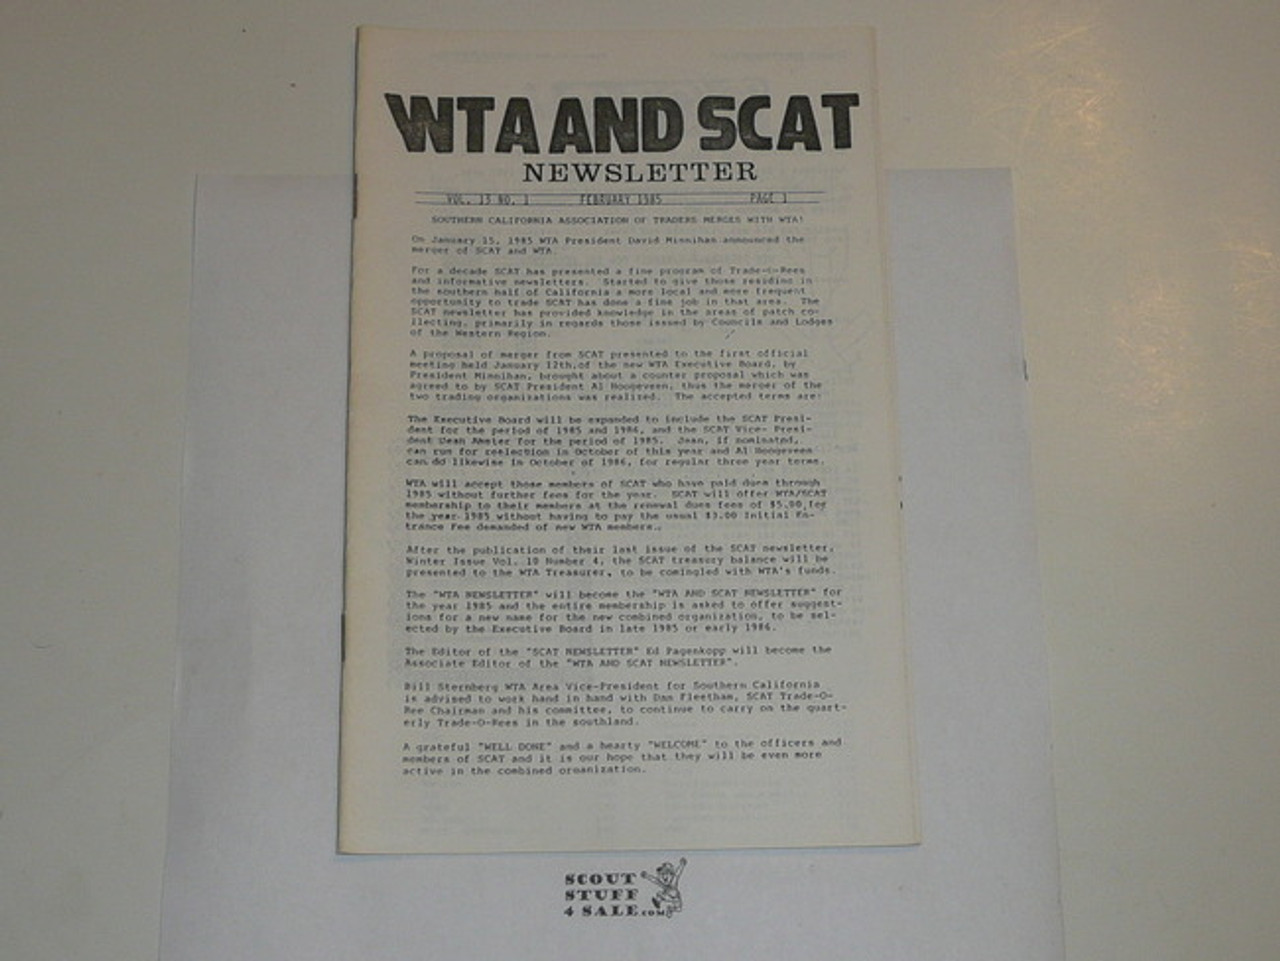 WTA and SCAT Newsletter, 1985 February, Vol 13 #1, Merger of WTA and SCAT